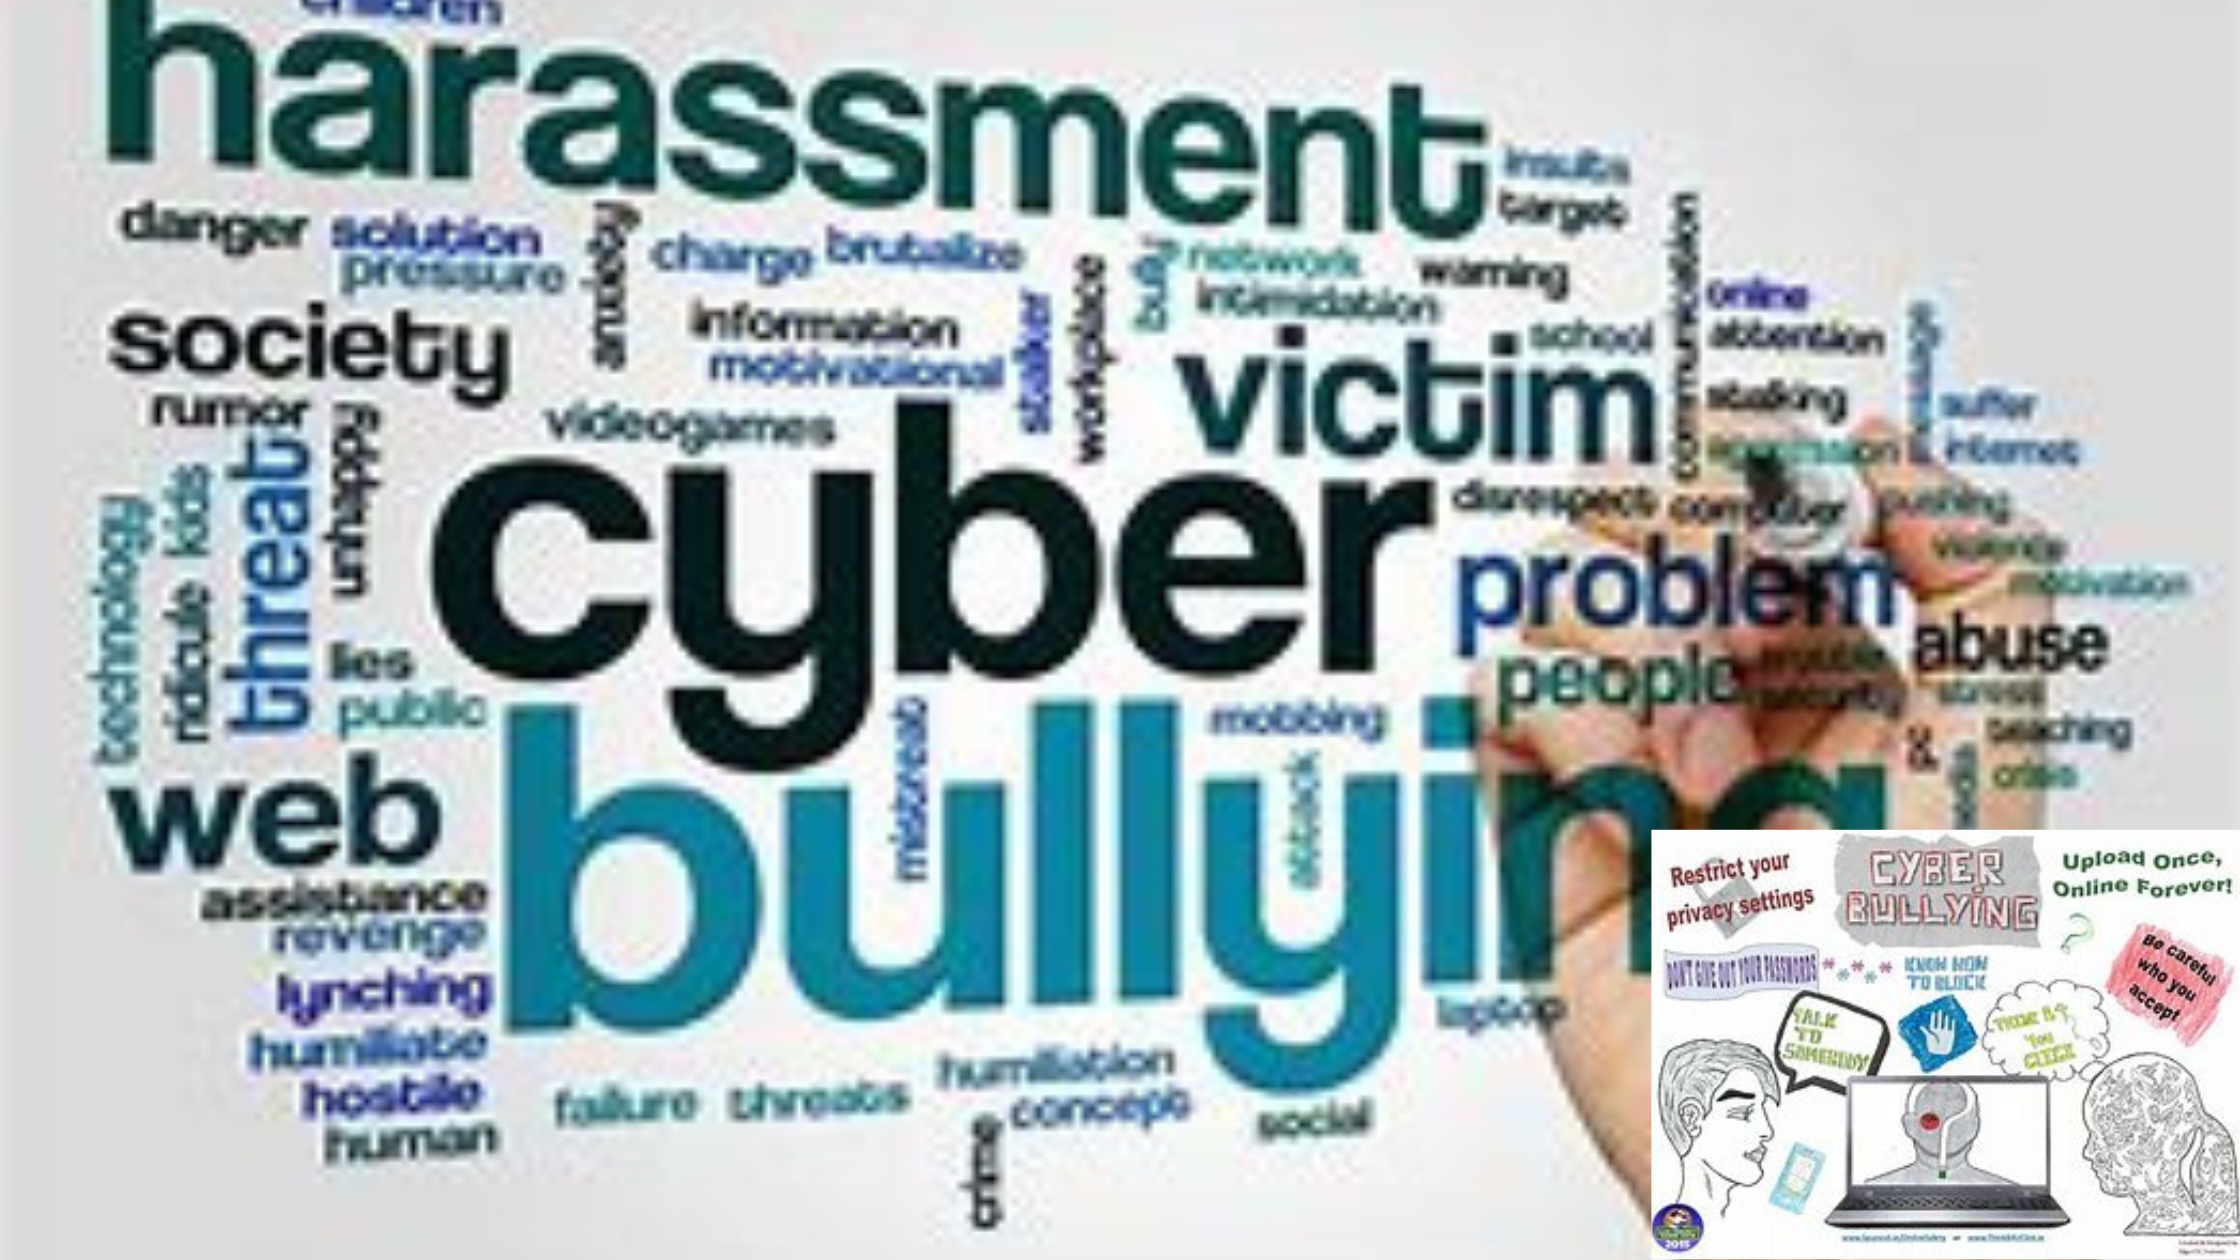 Internet Safety and Cyberbullying Prevention